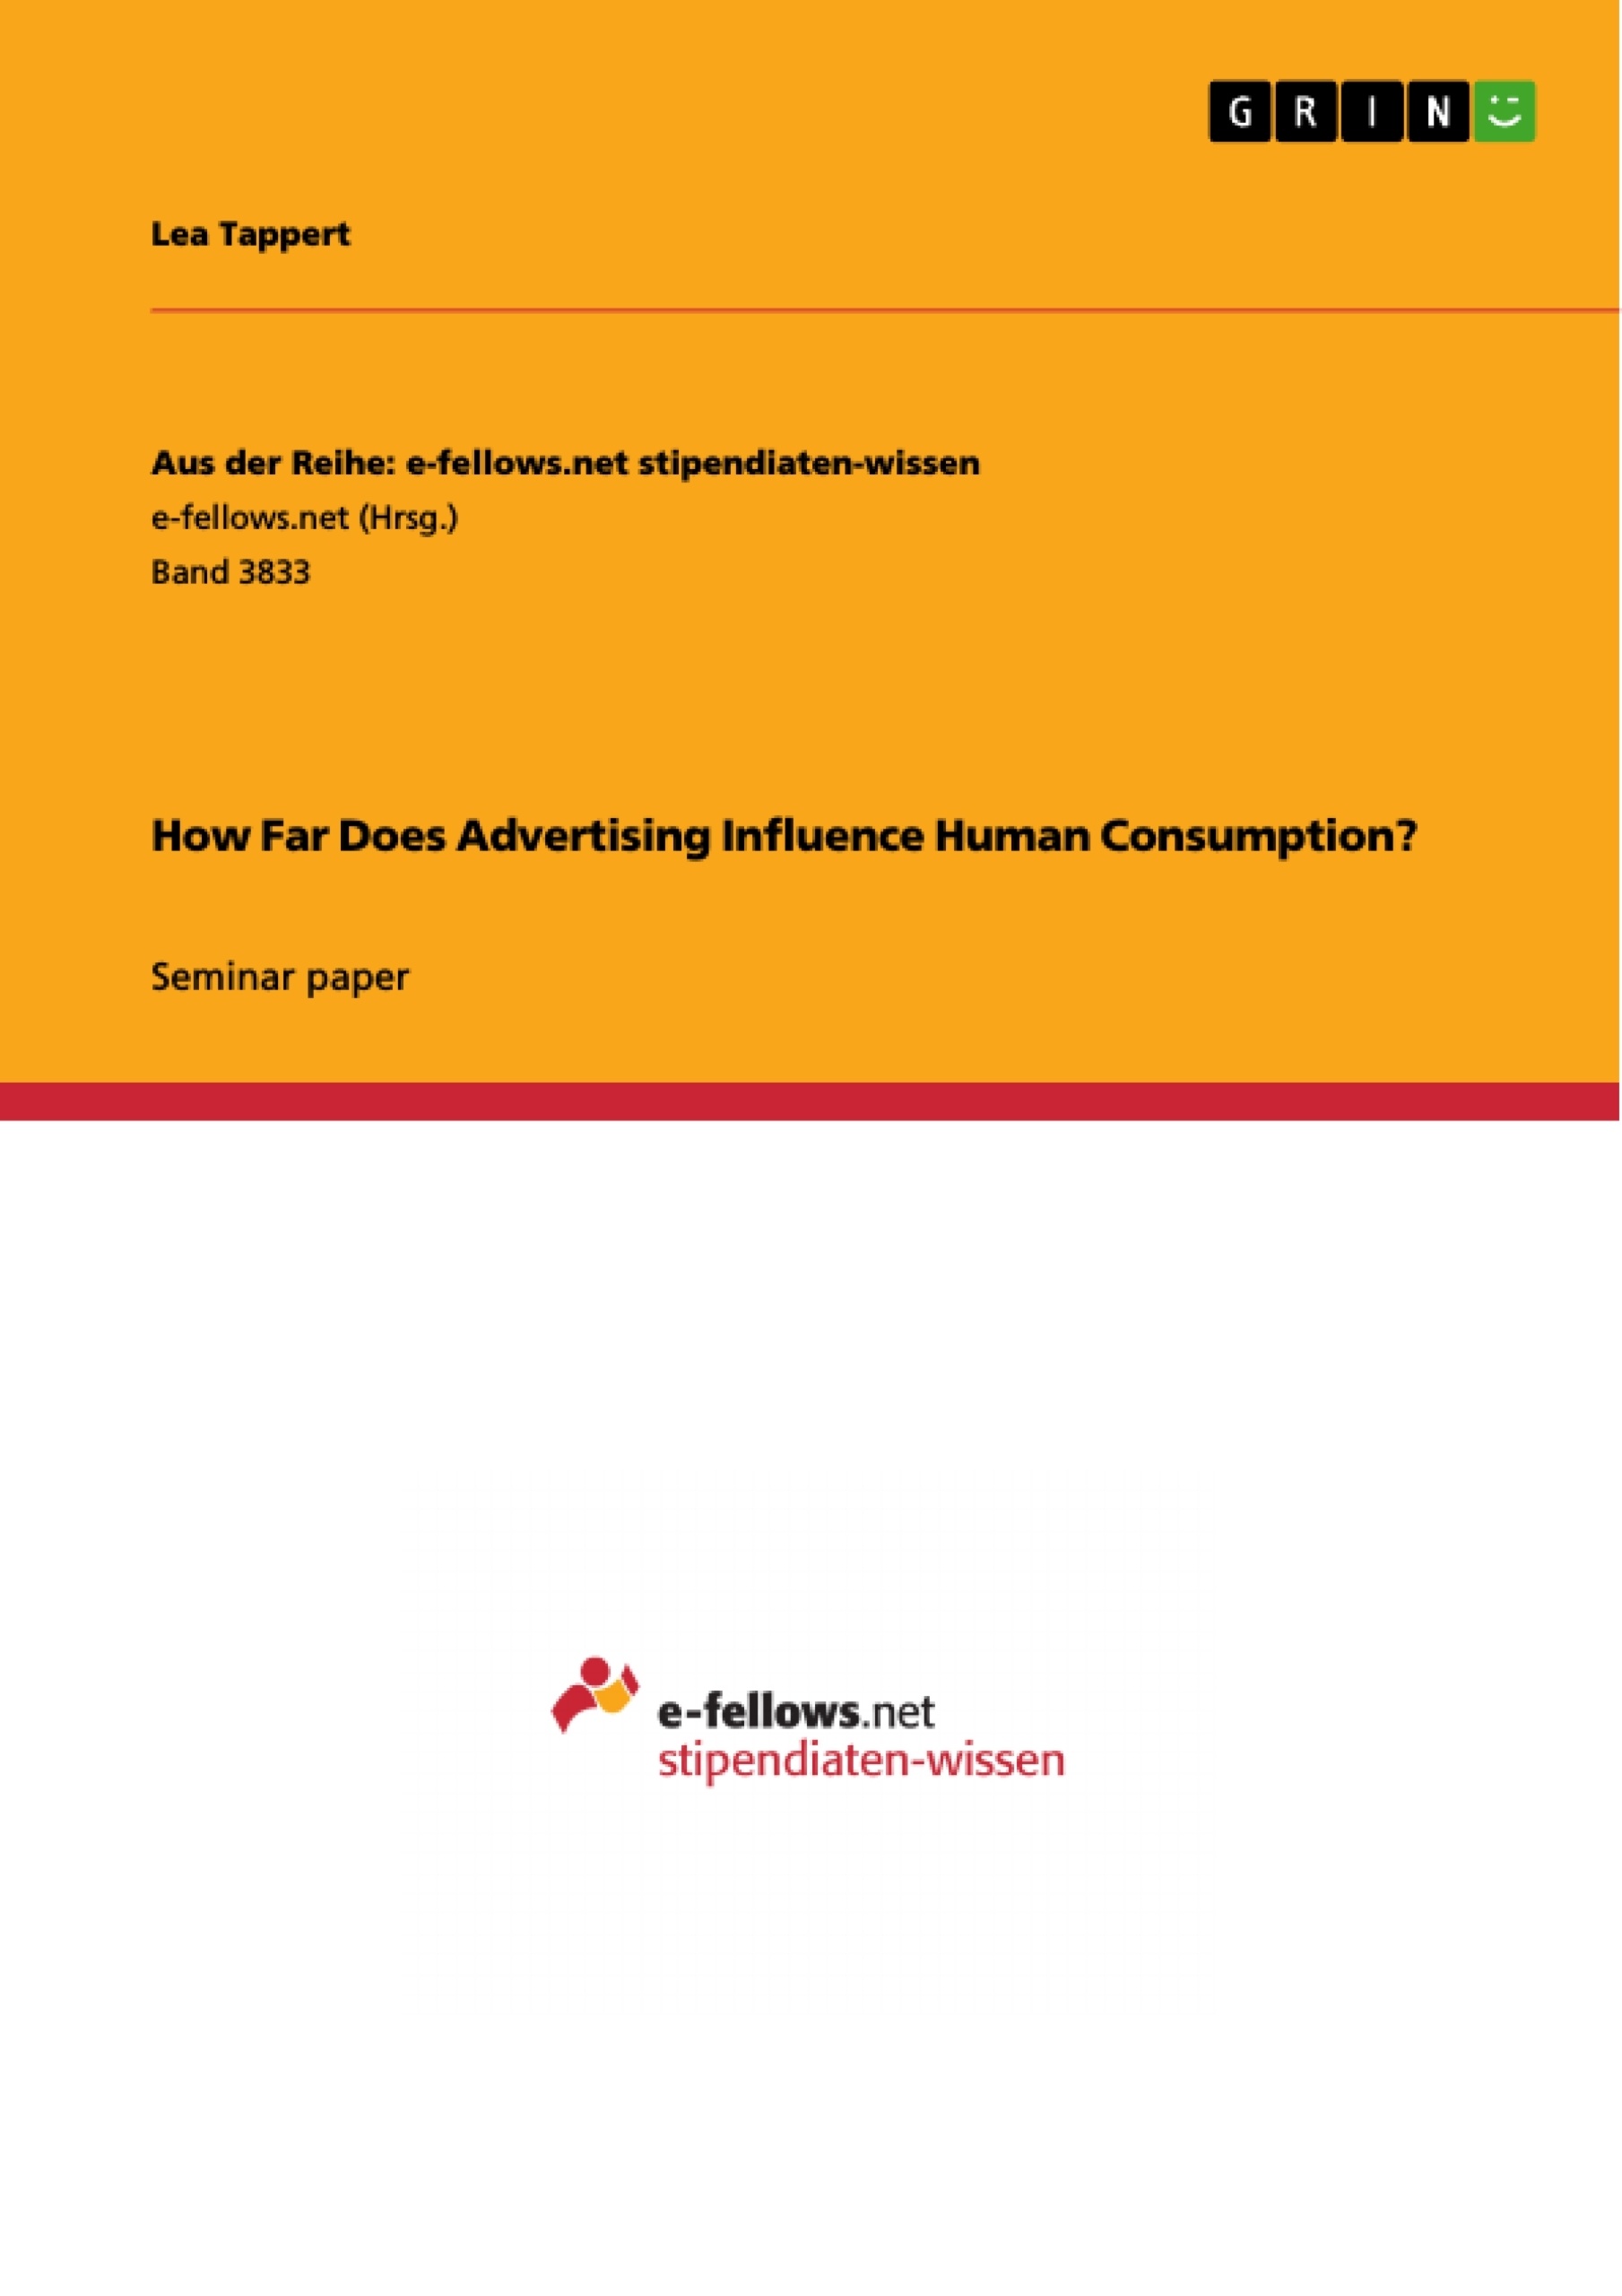 Title: How Far Does Advertising Influence Human Consumption?